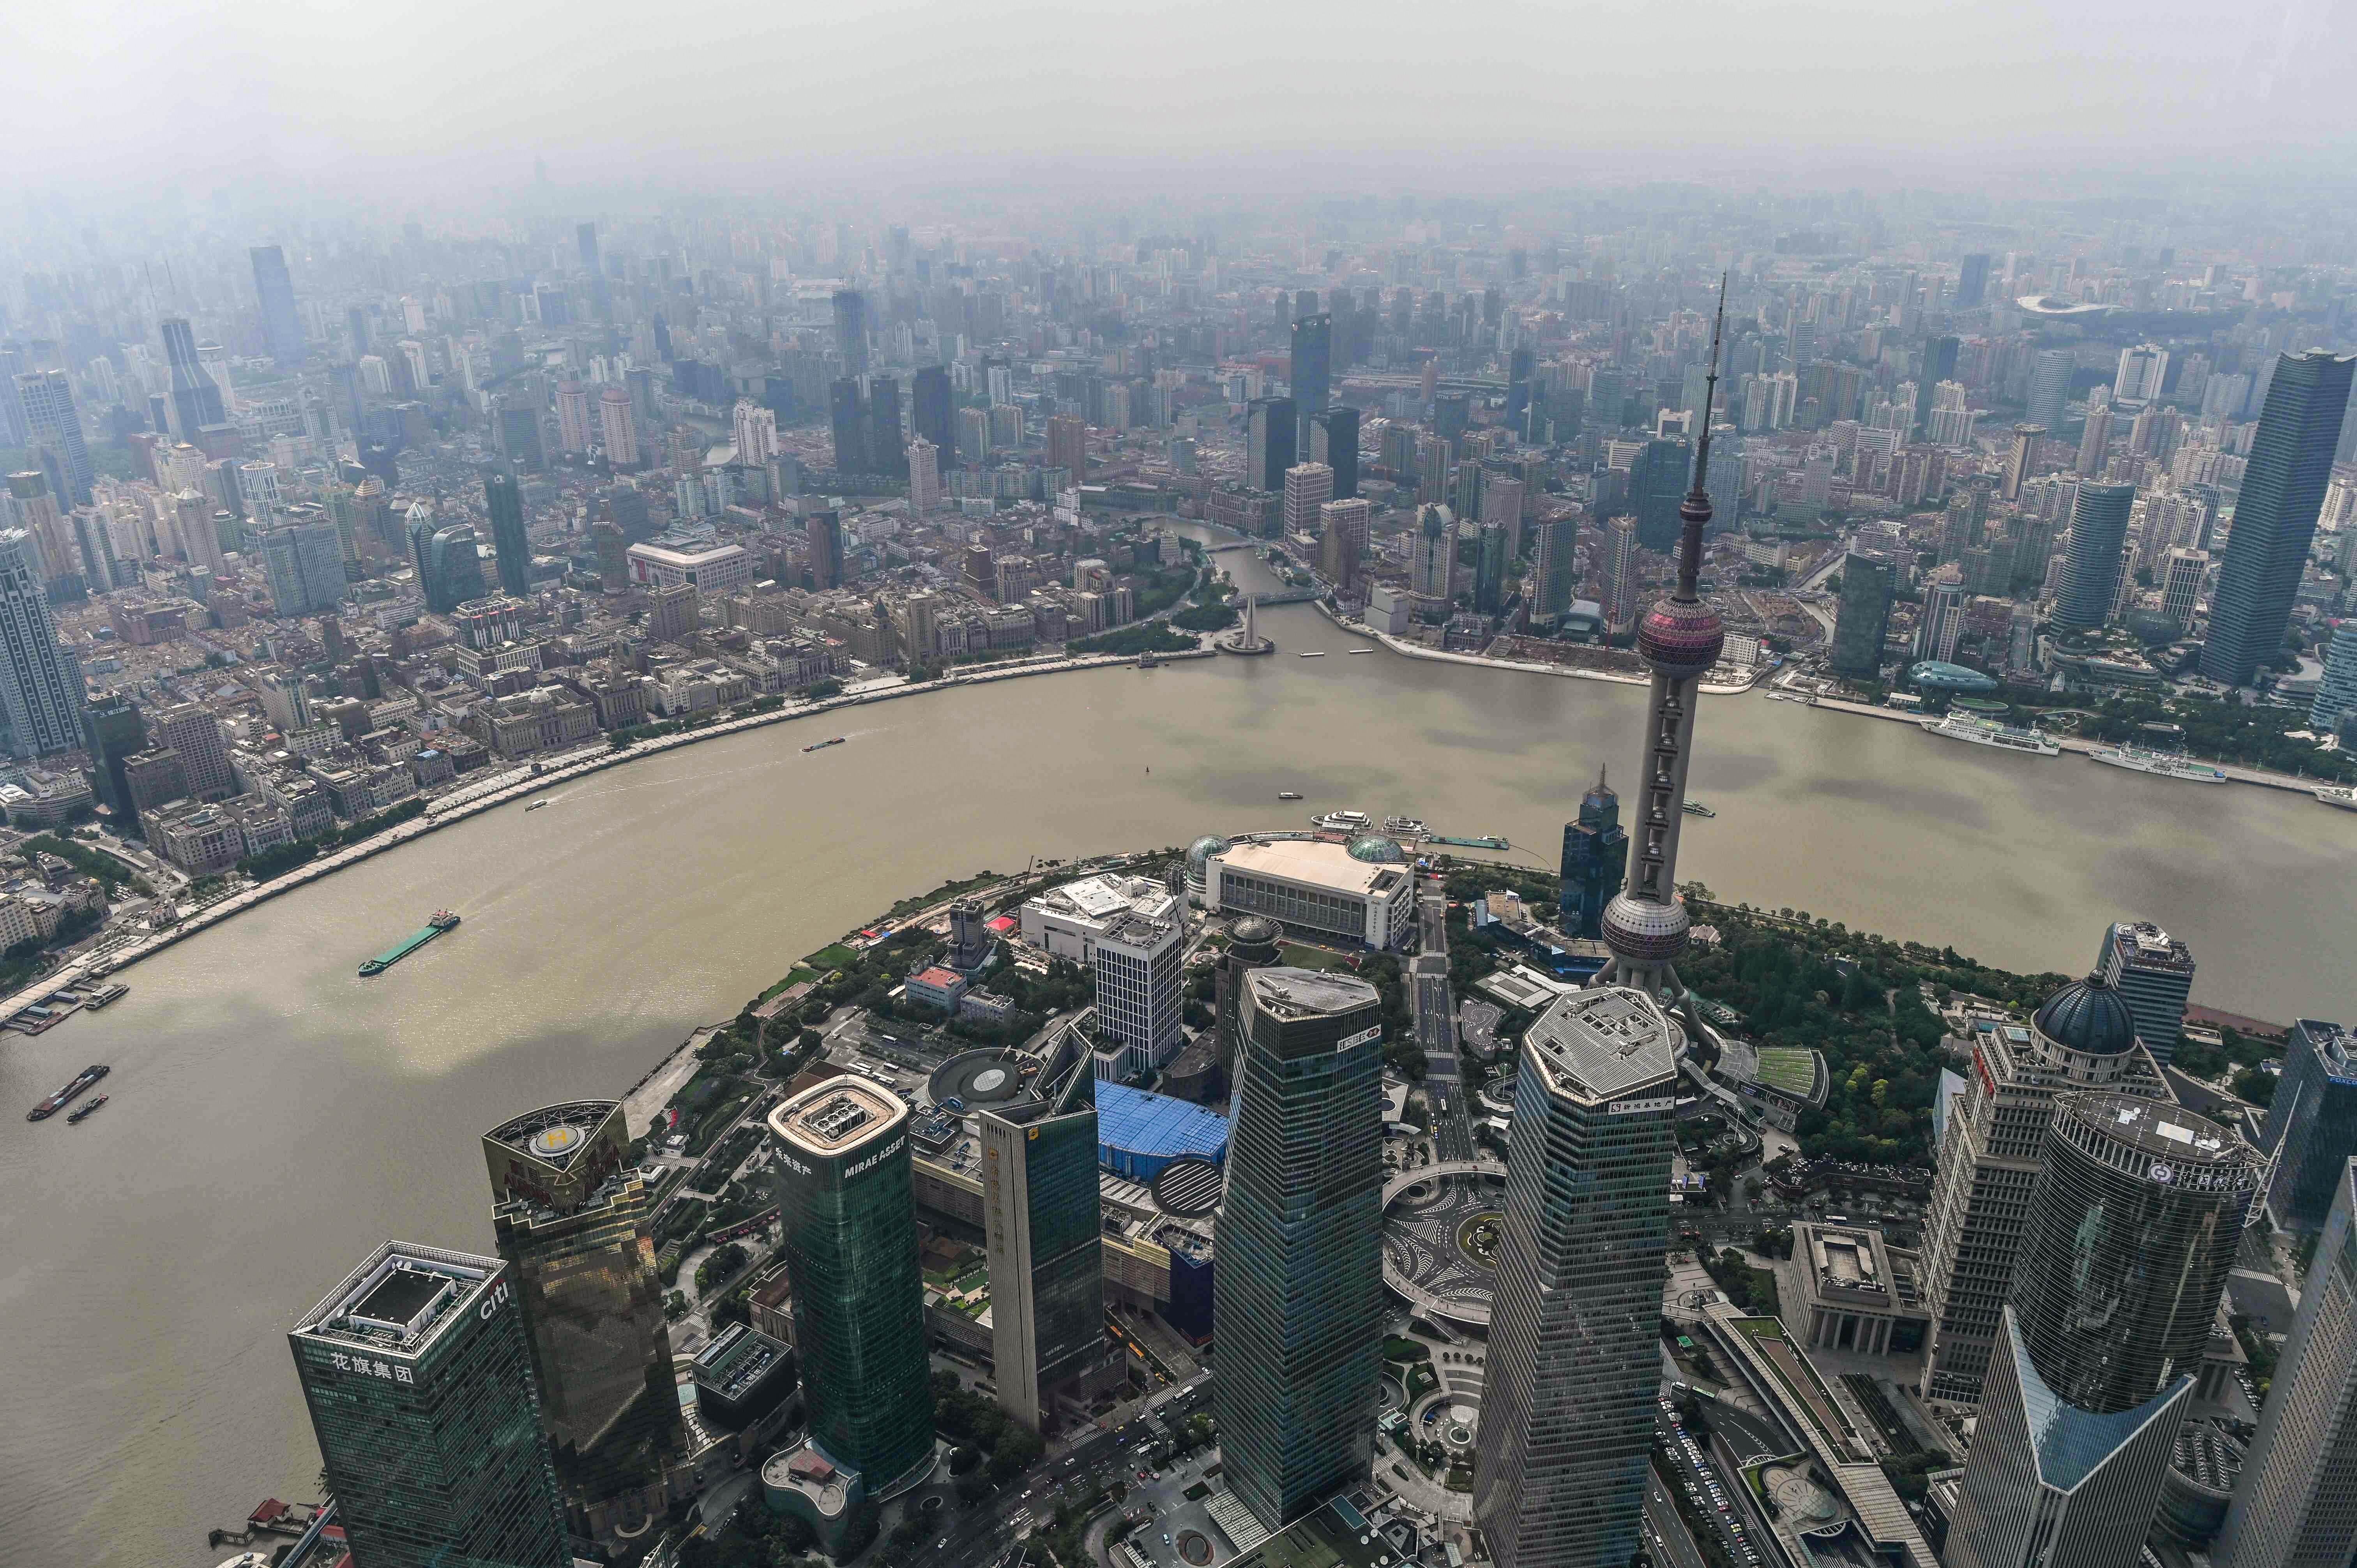 Shanghai heads the economic integration of the Yangtze River Delta, part of national strategic plans to integrate economic mega regions and generate domestic demand. Photo: AFP